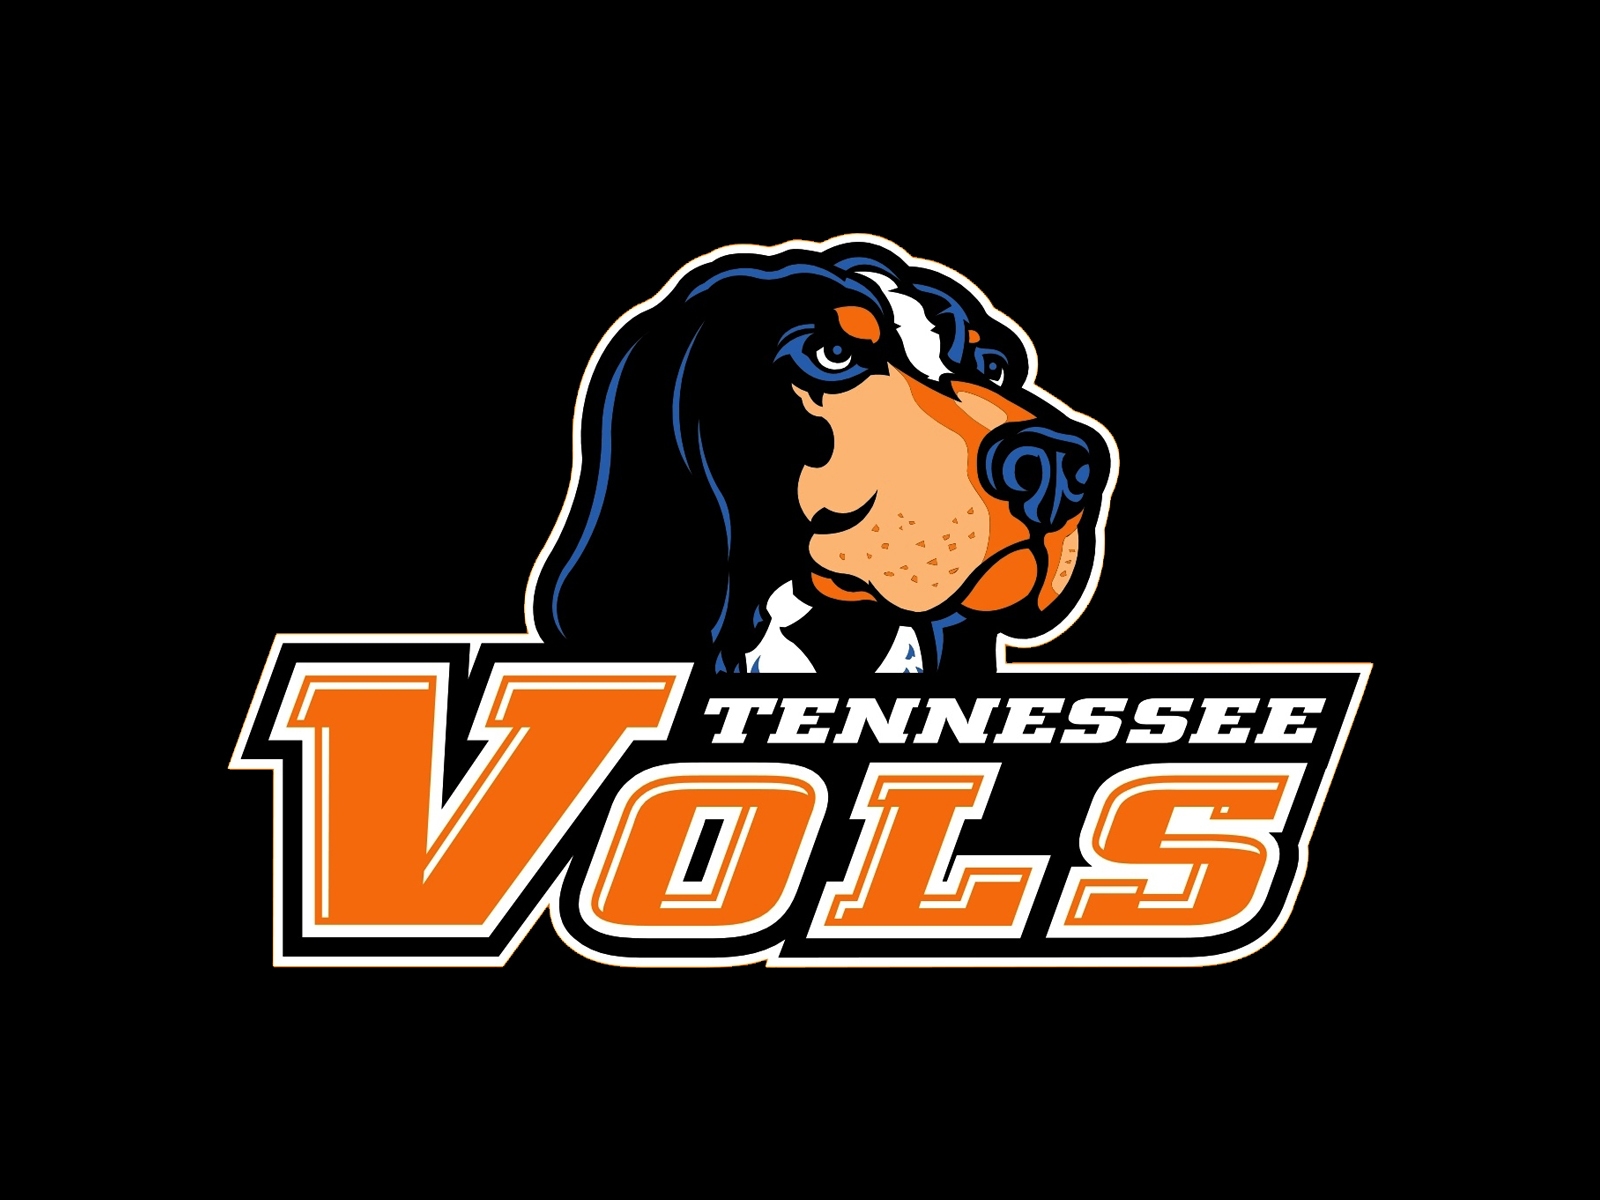 Tennessee Vols Logo Black for 1600 x 1200 resolution